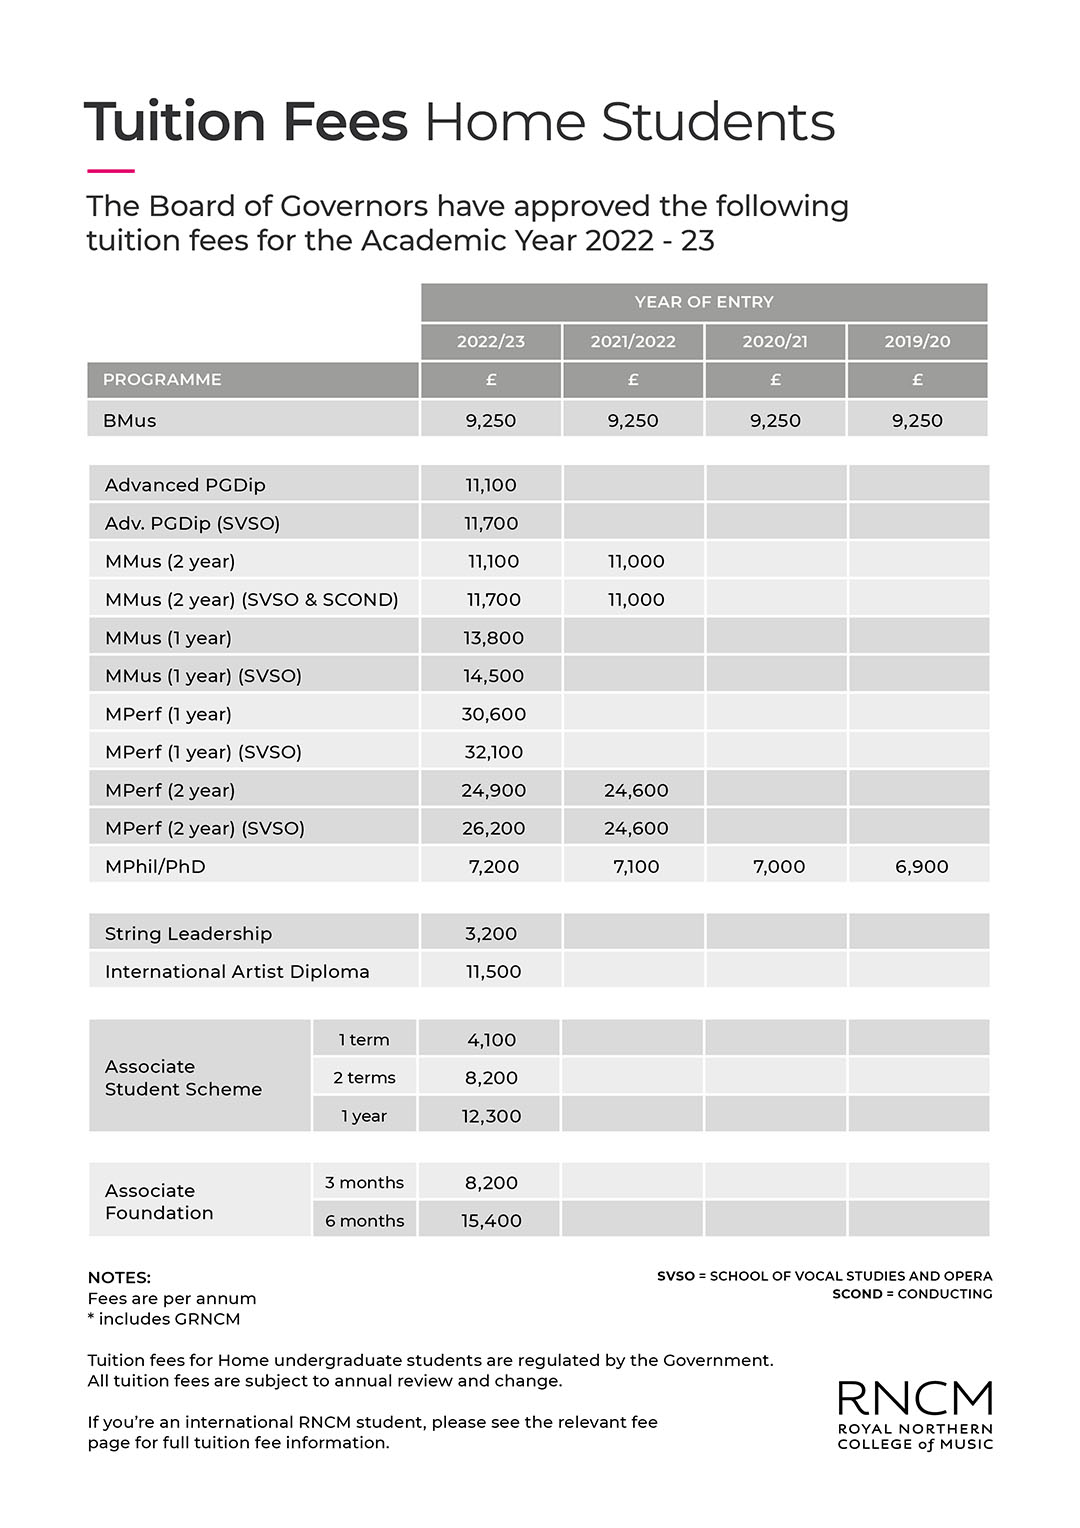 Image of Home Tuition Fees